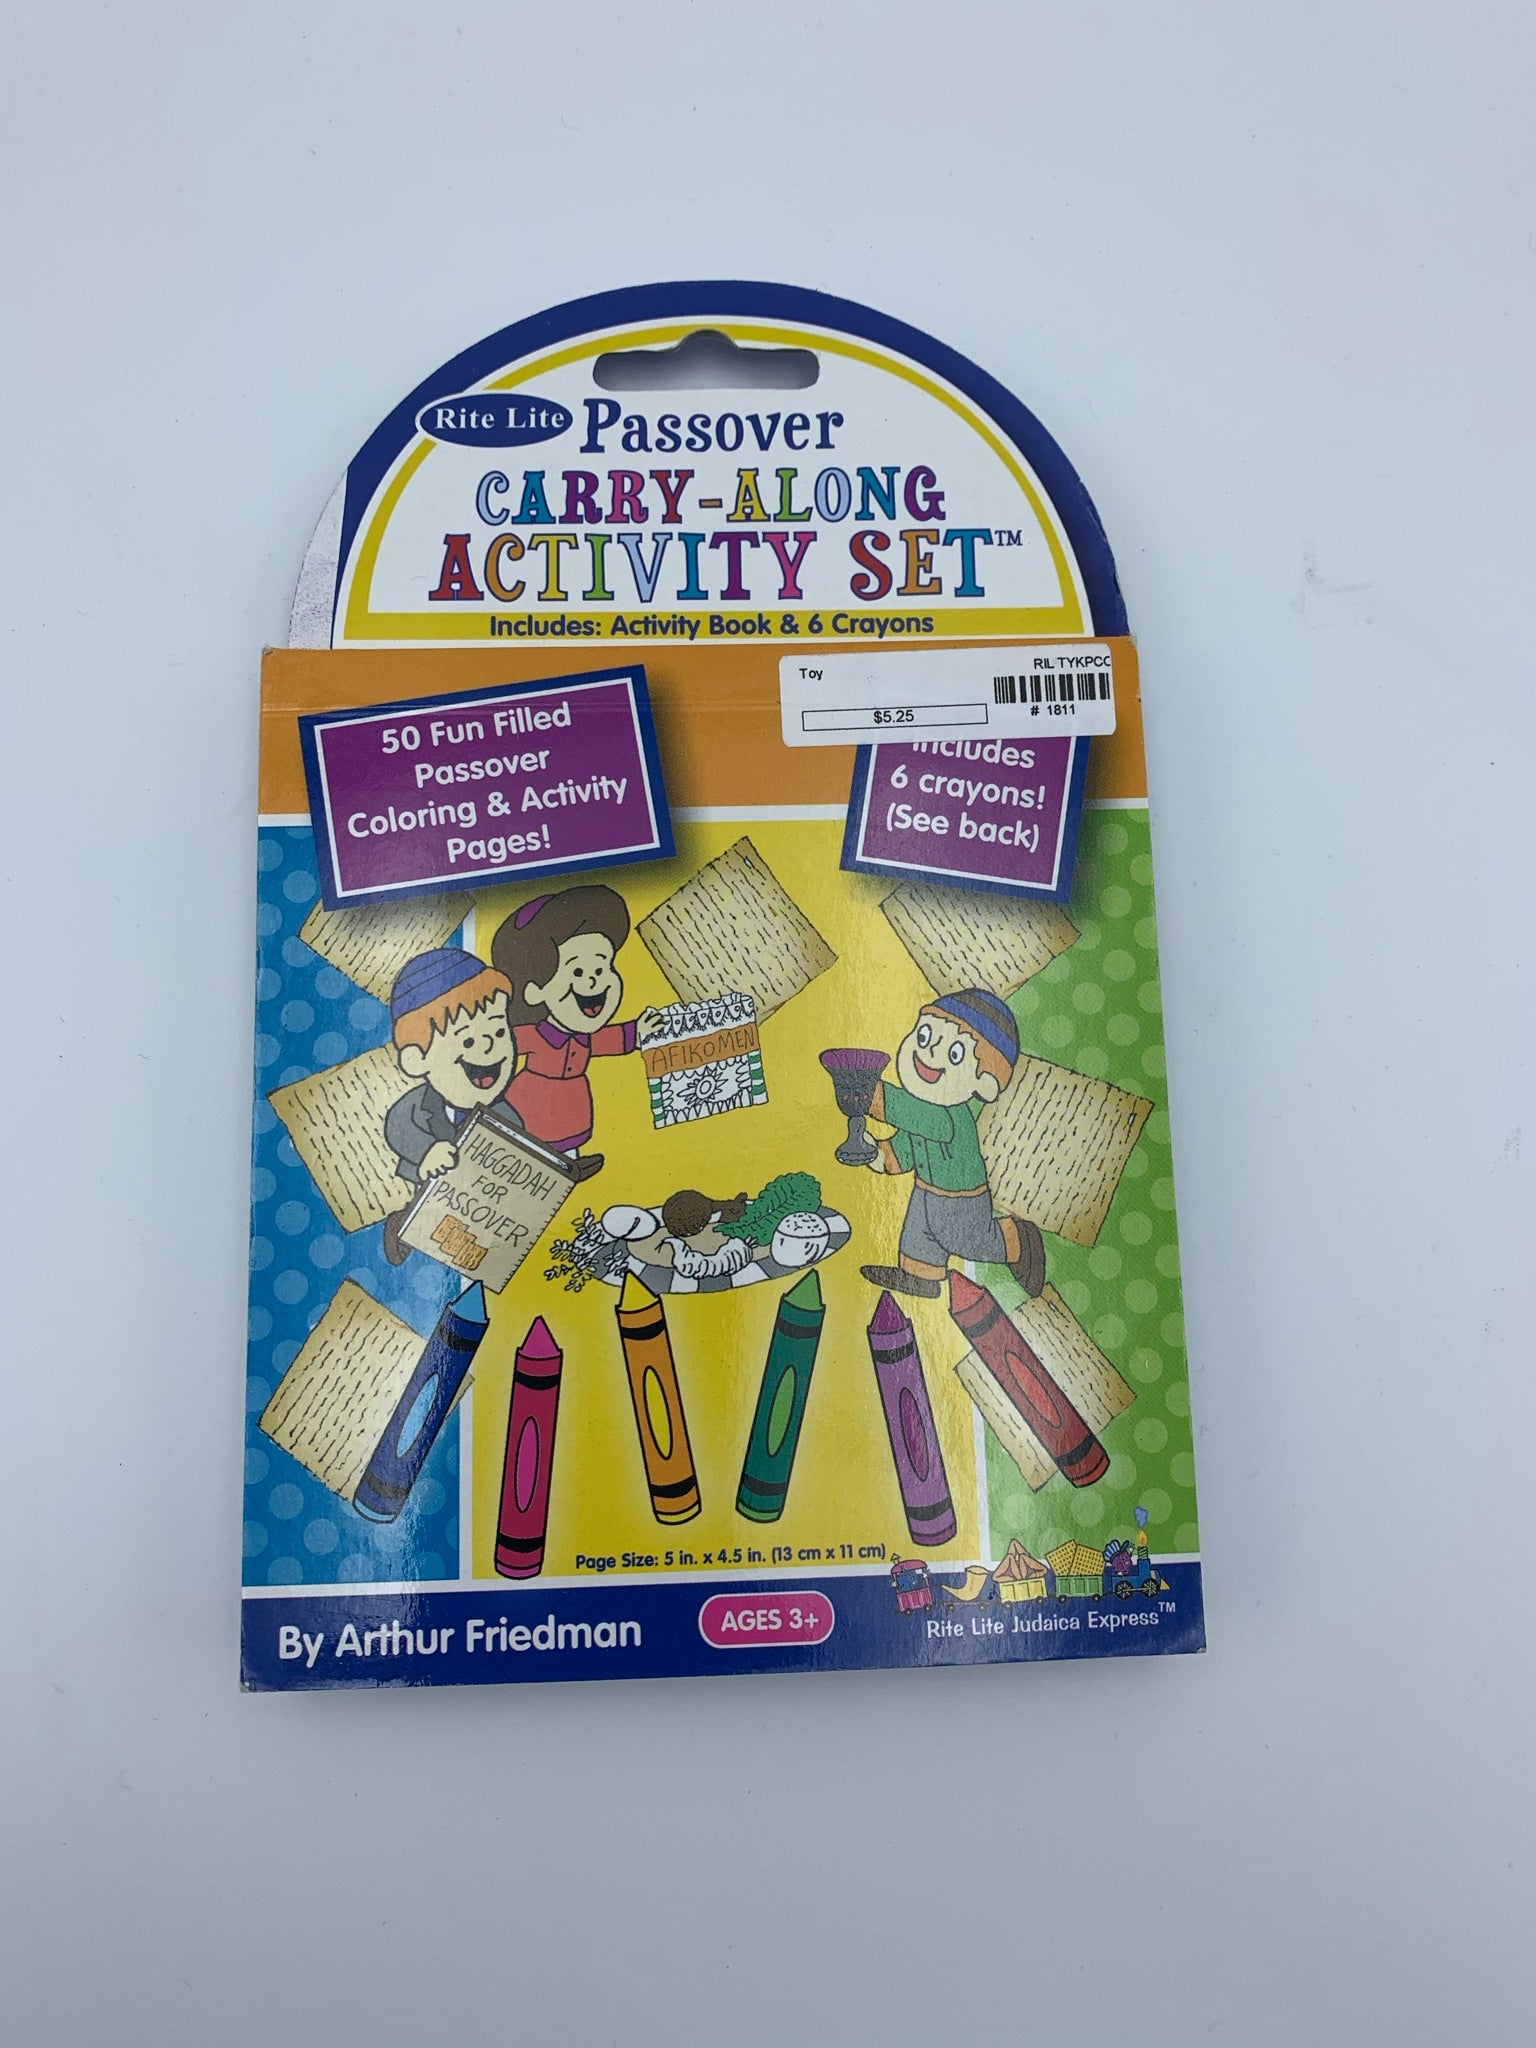 Passover carry along activity set